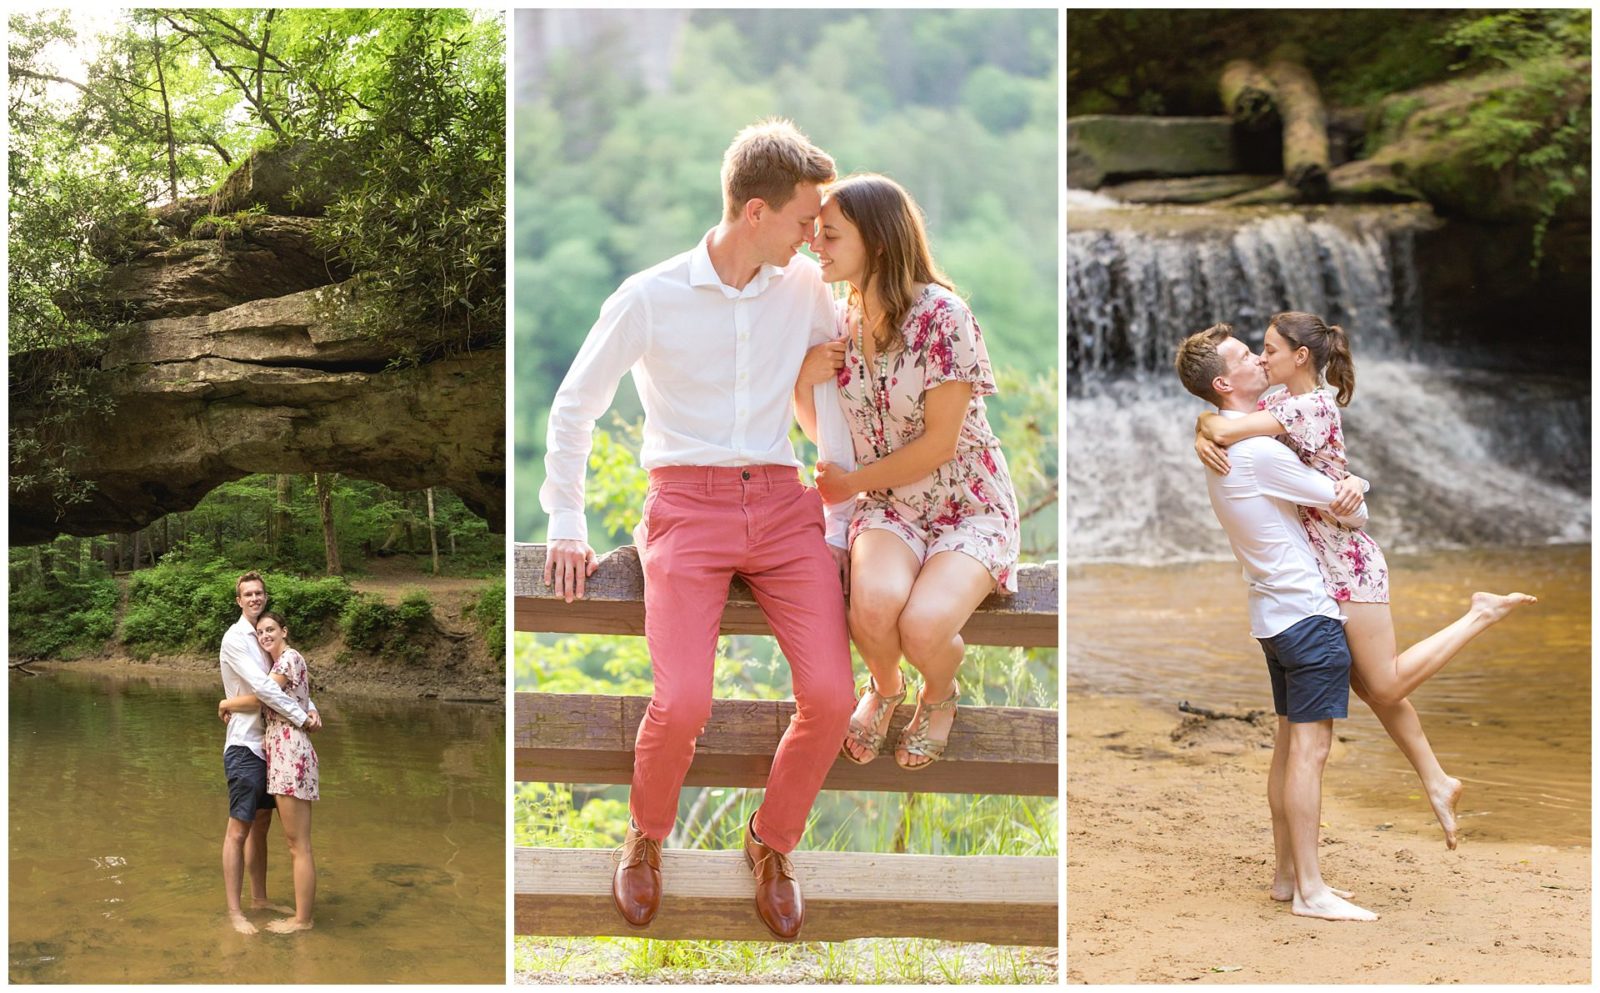 Engagement photos on the Rock Bridge trail in the Red River Gorge.